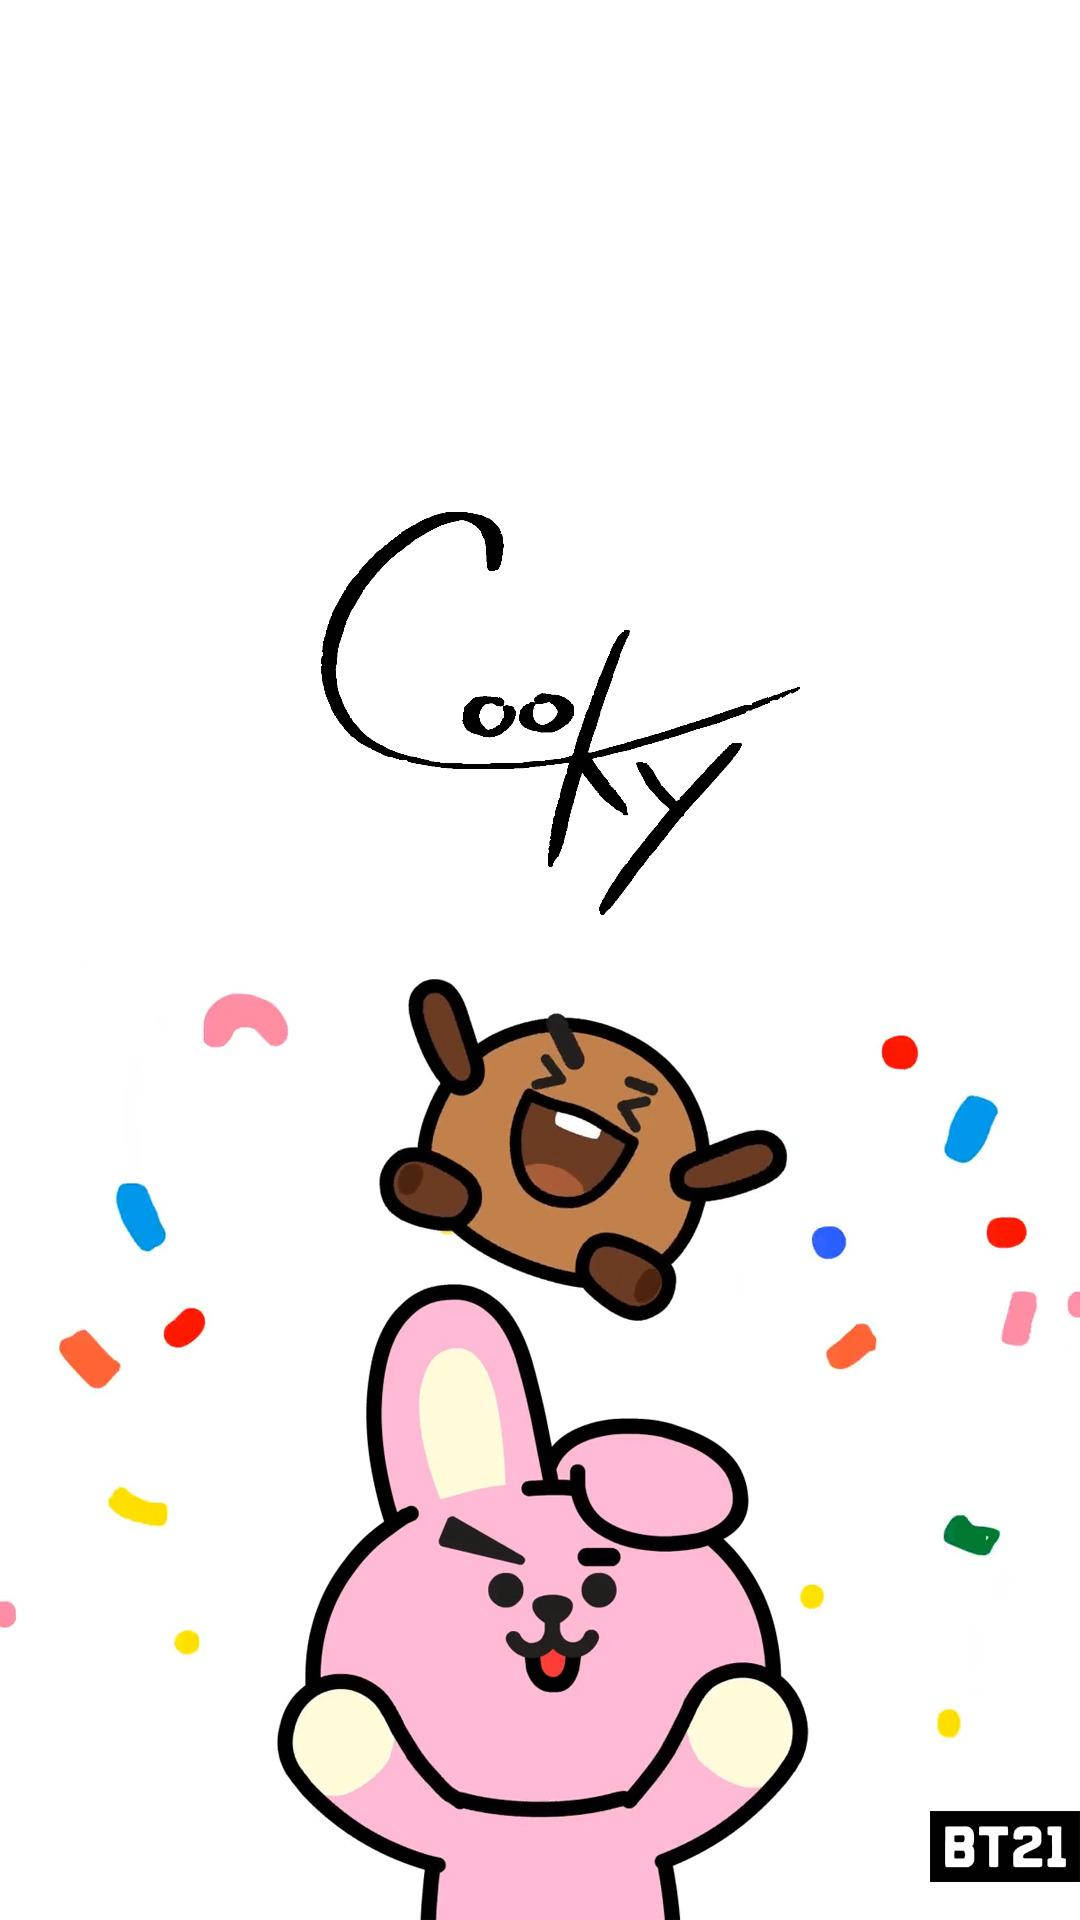 Shooky Bt21 With Cooky Background